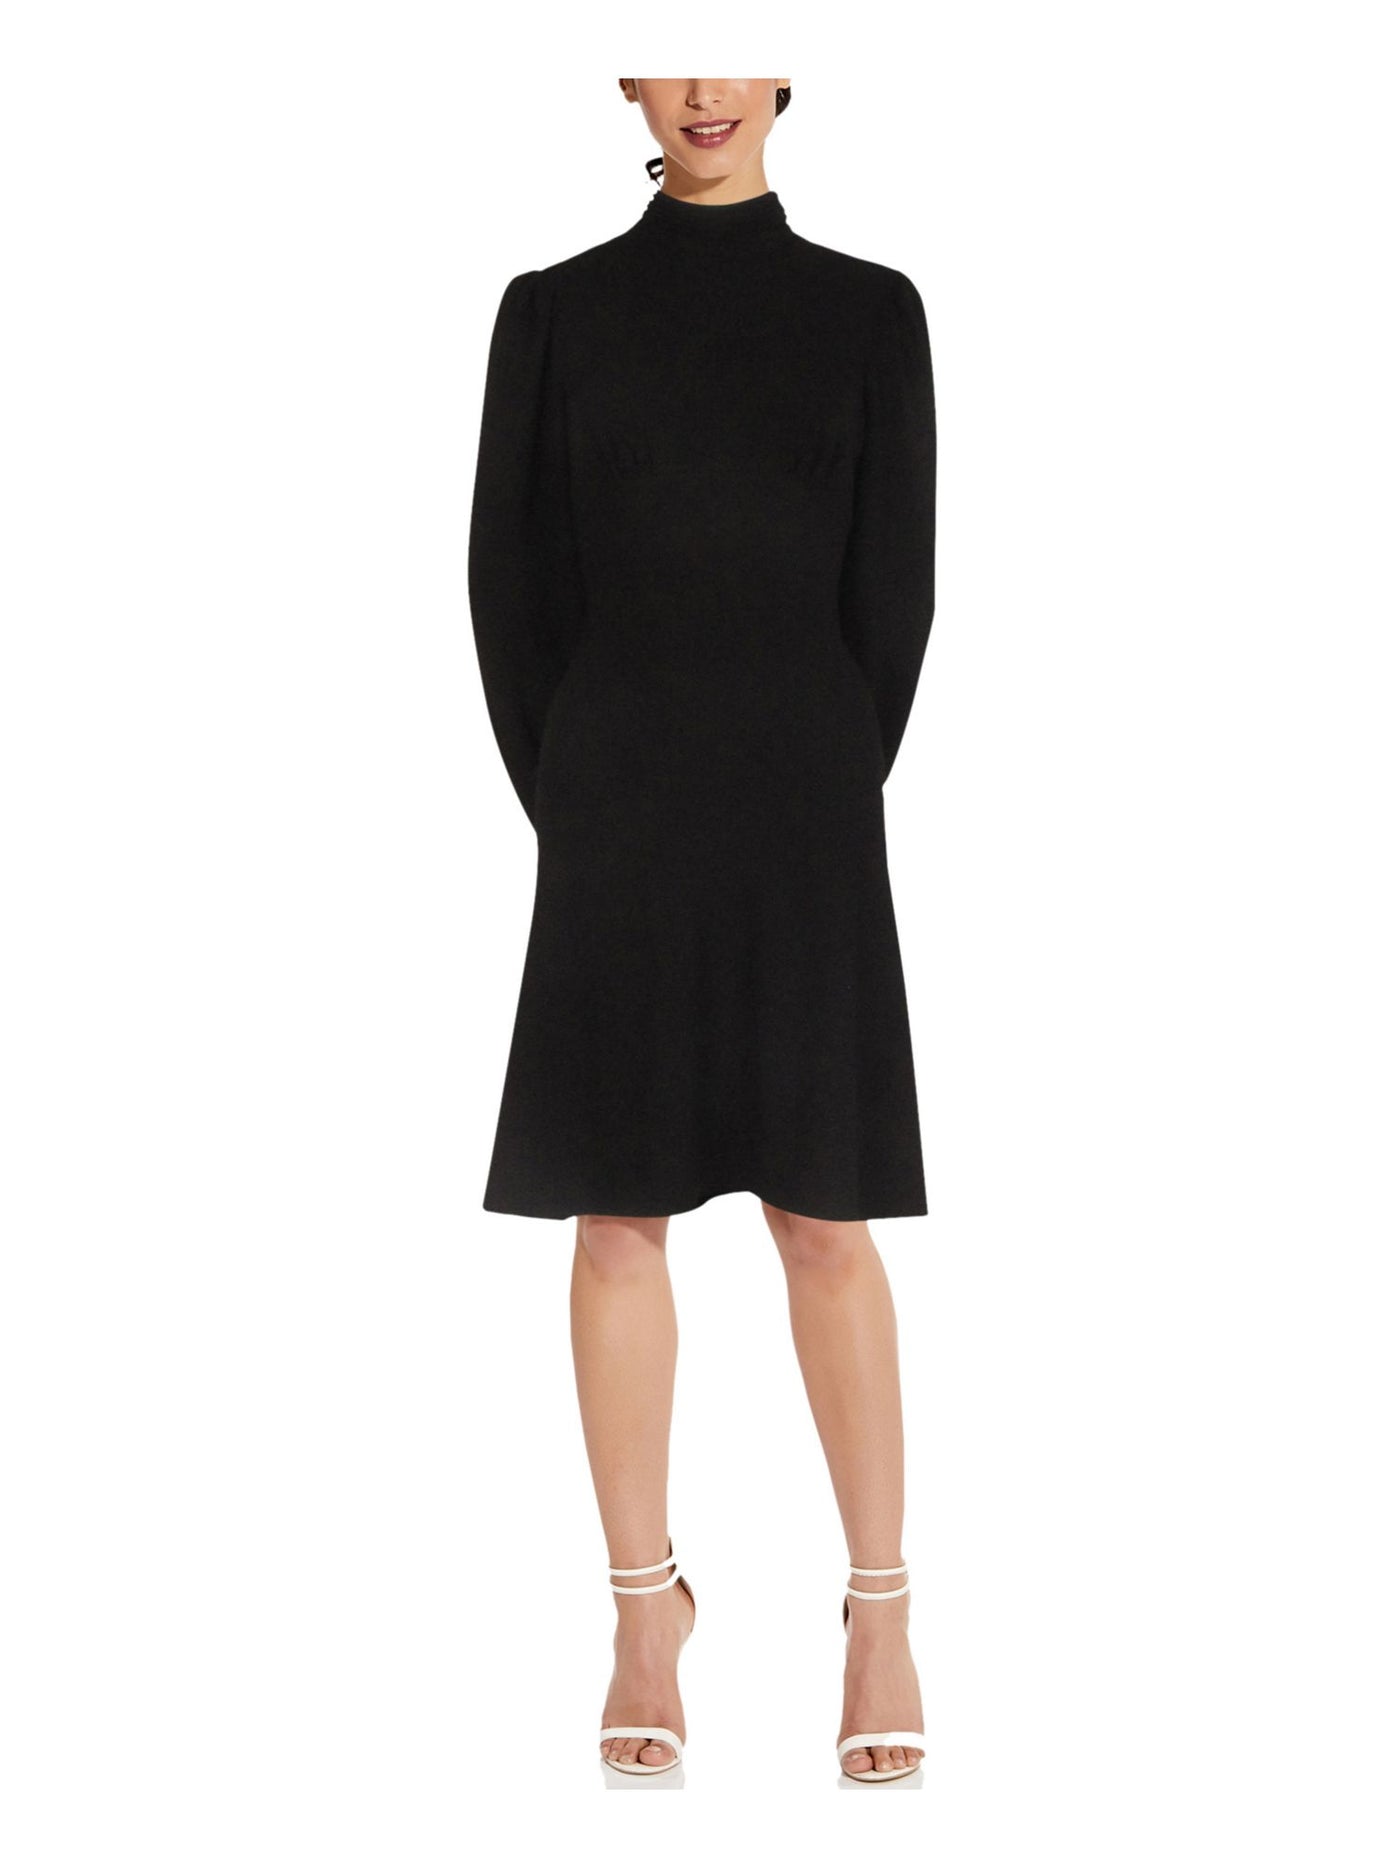 ADRIANNA PAPELL Womens Black Mock Neck Long Sleeve Above The Knee Wear To Work Shift Dress 6